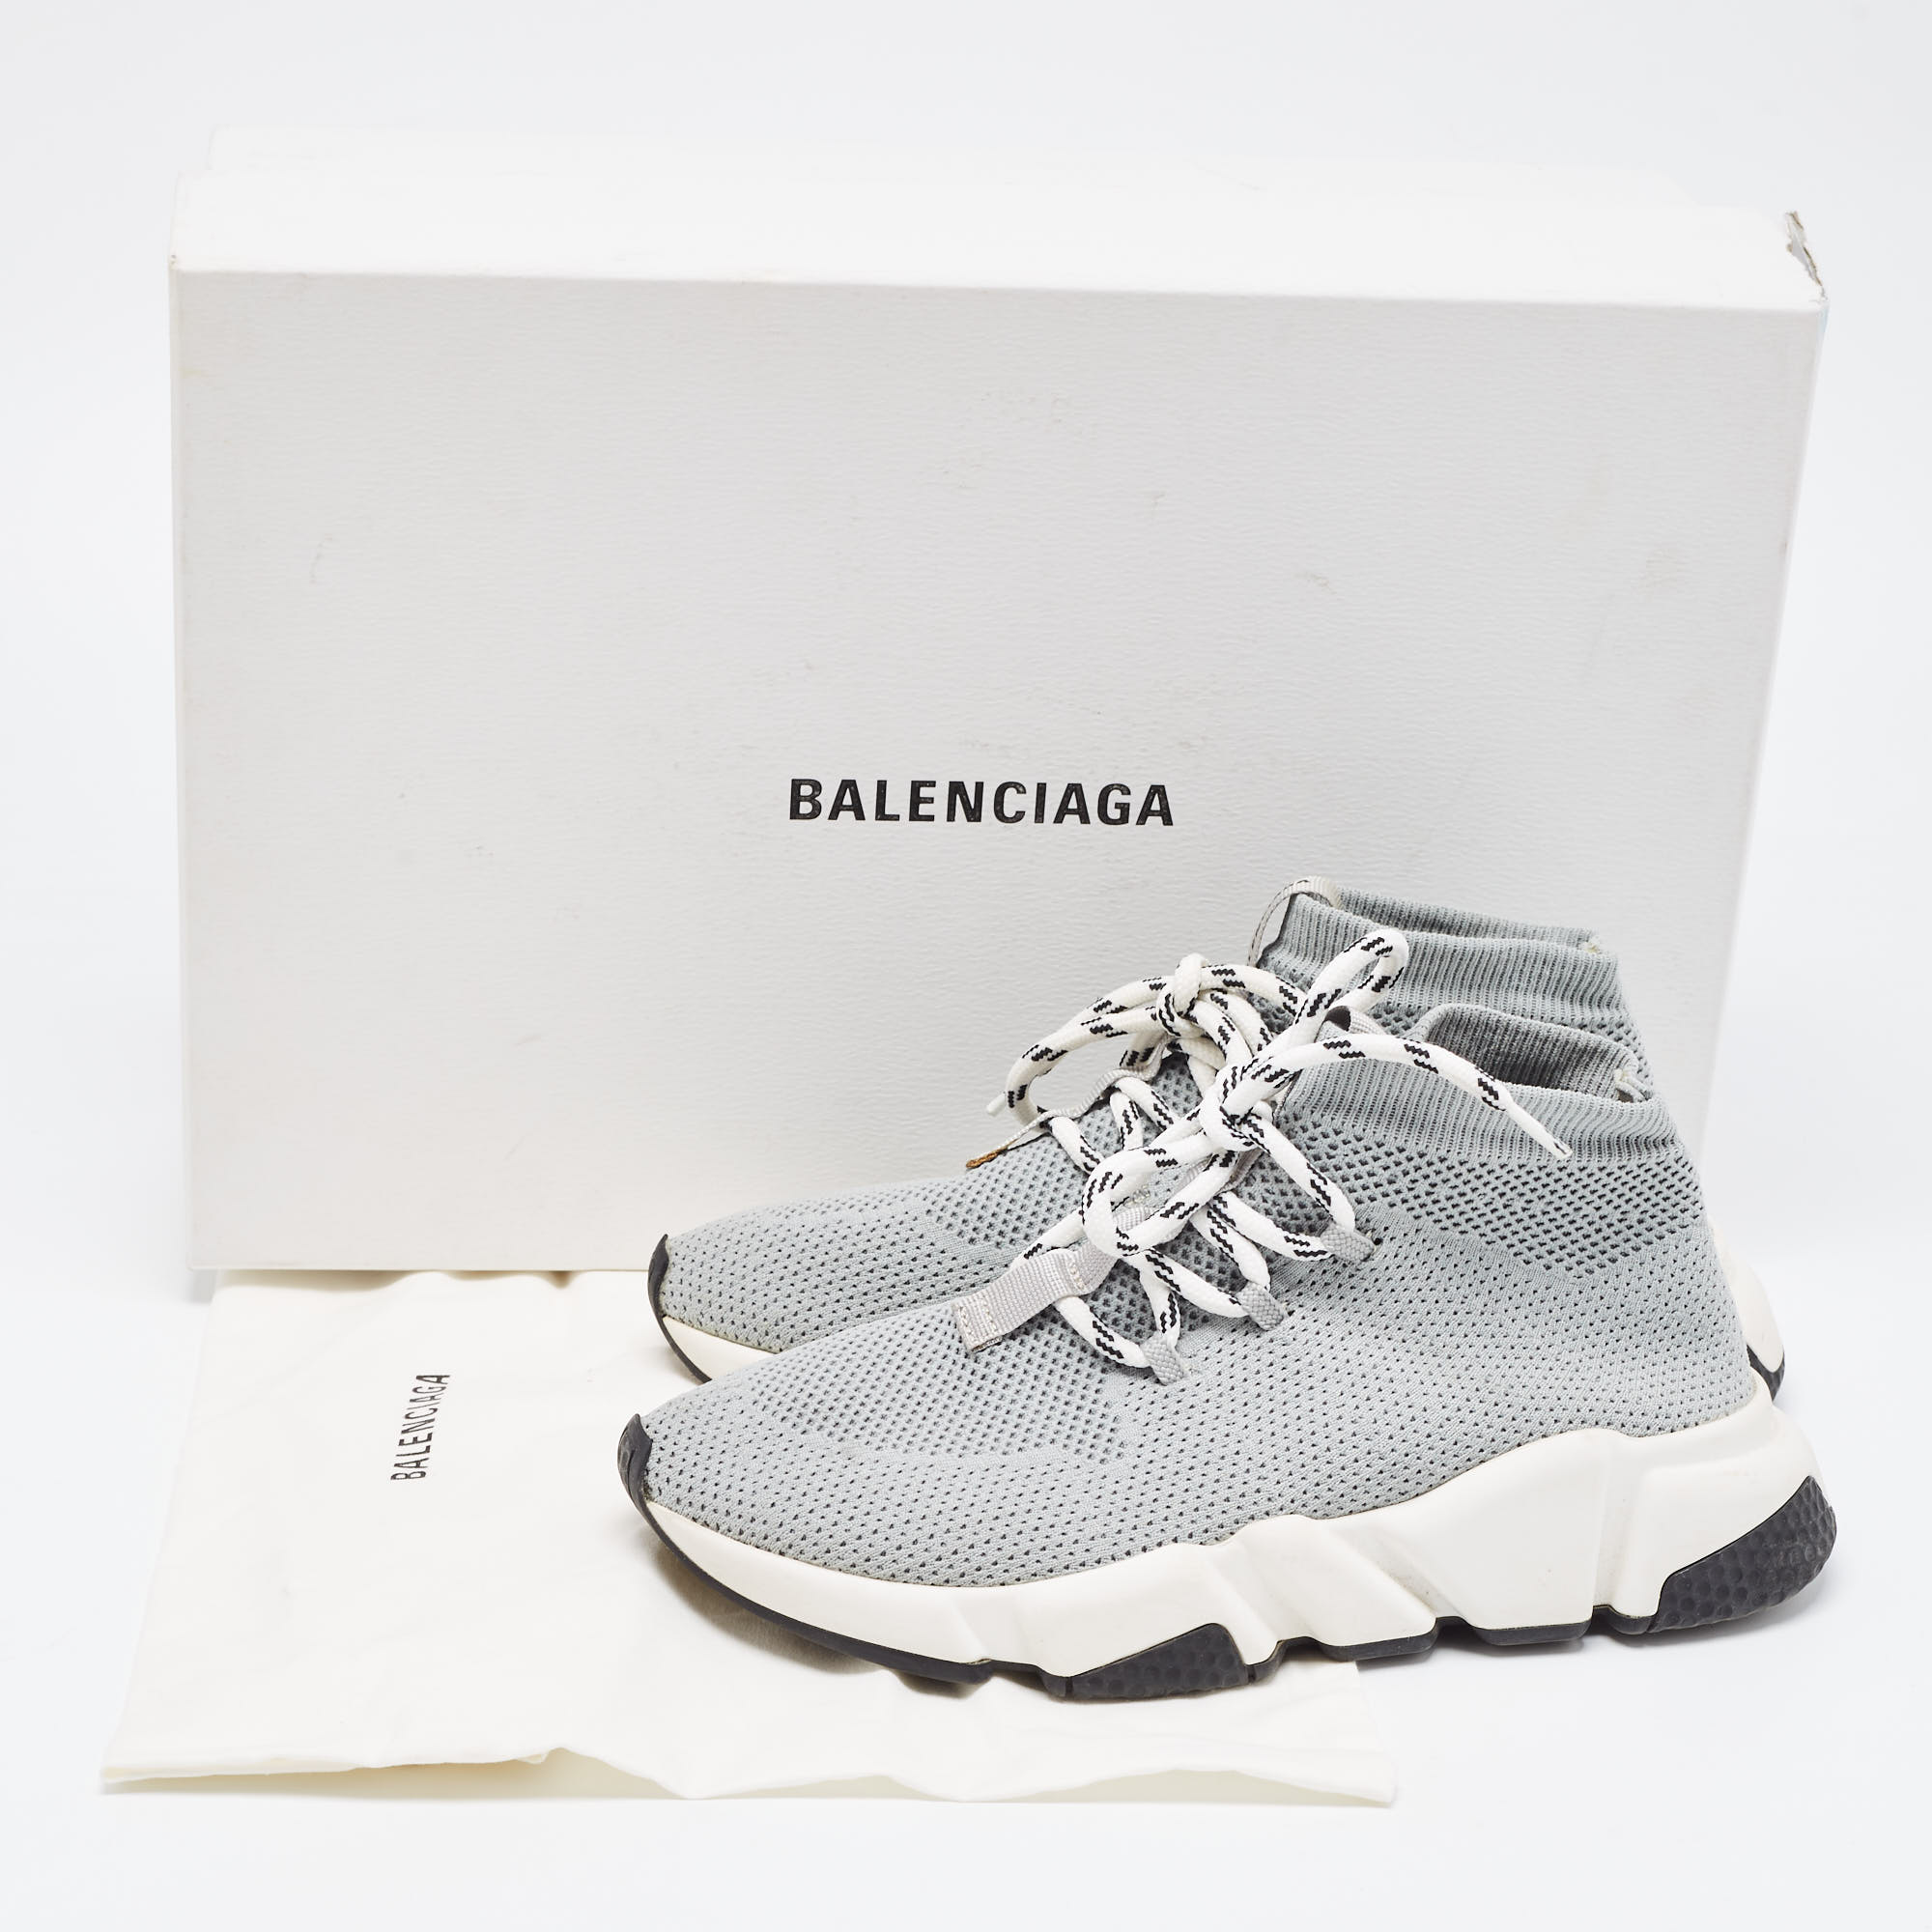 Balenciaga Grey Knit Speed Trainer High Top Sneakers Size 36